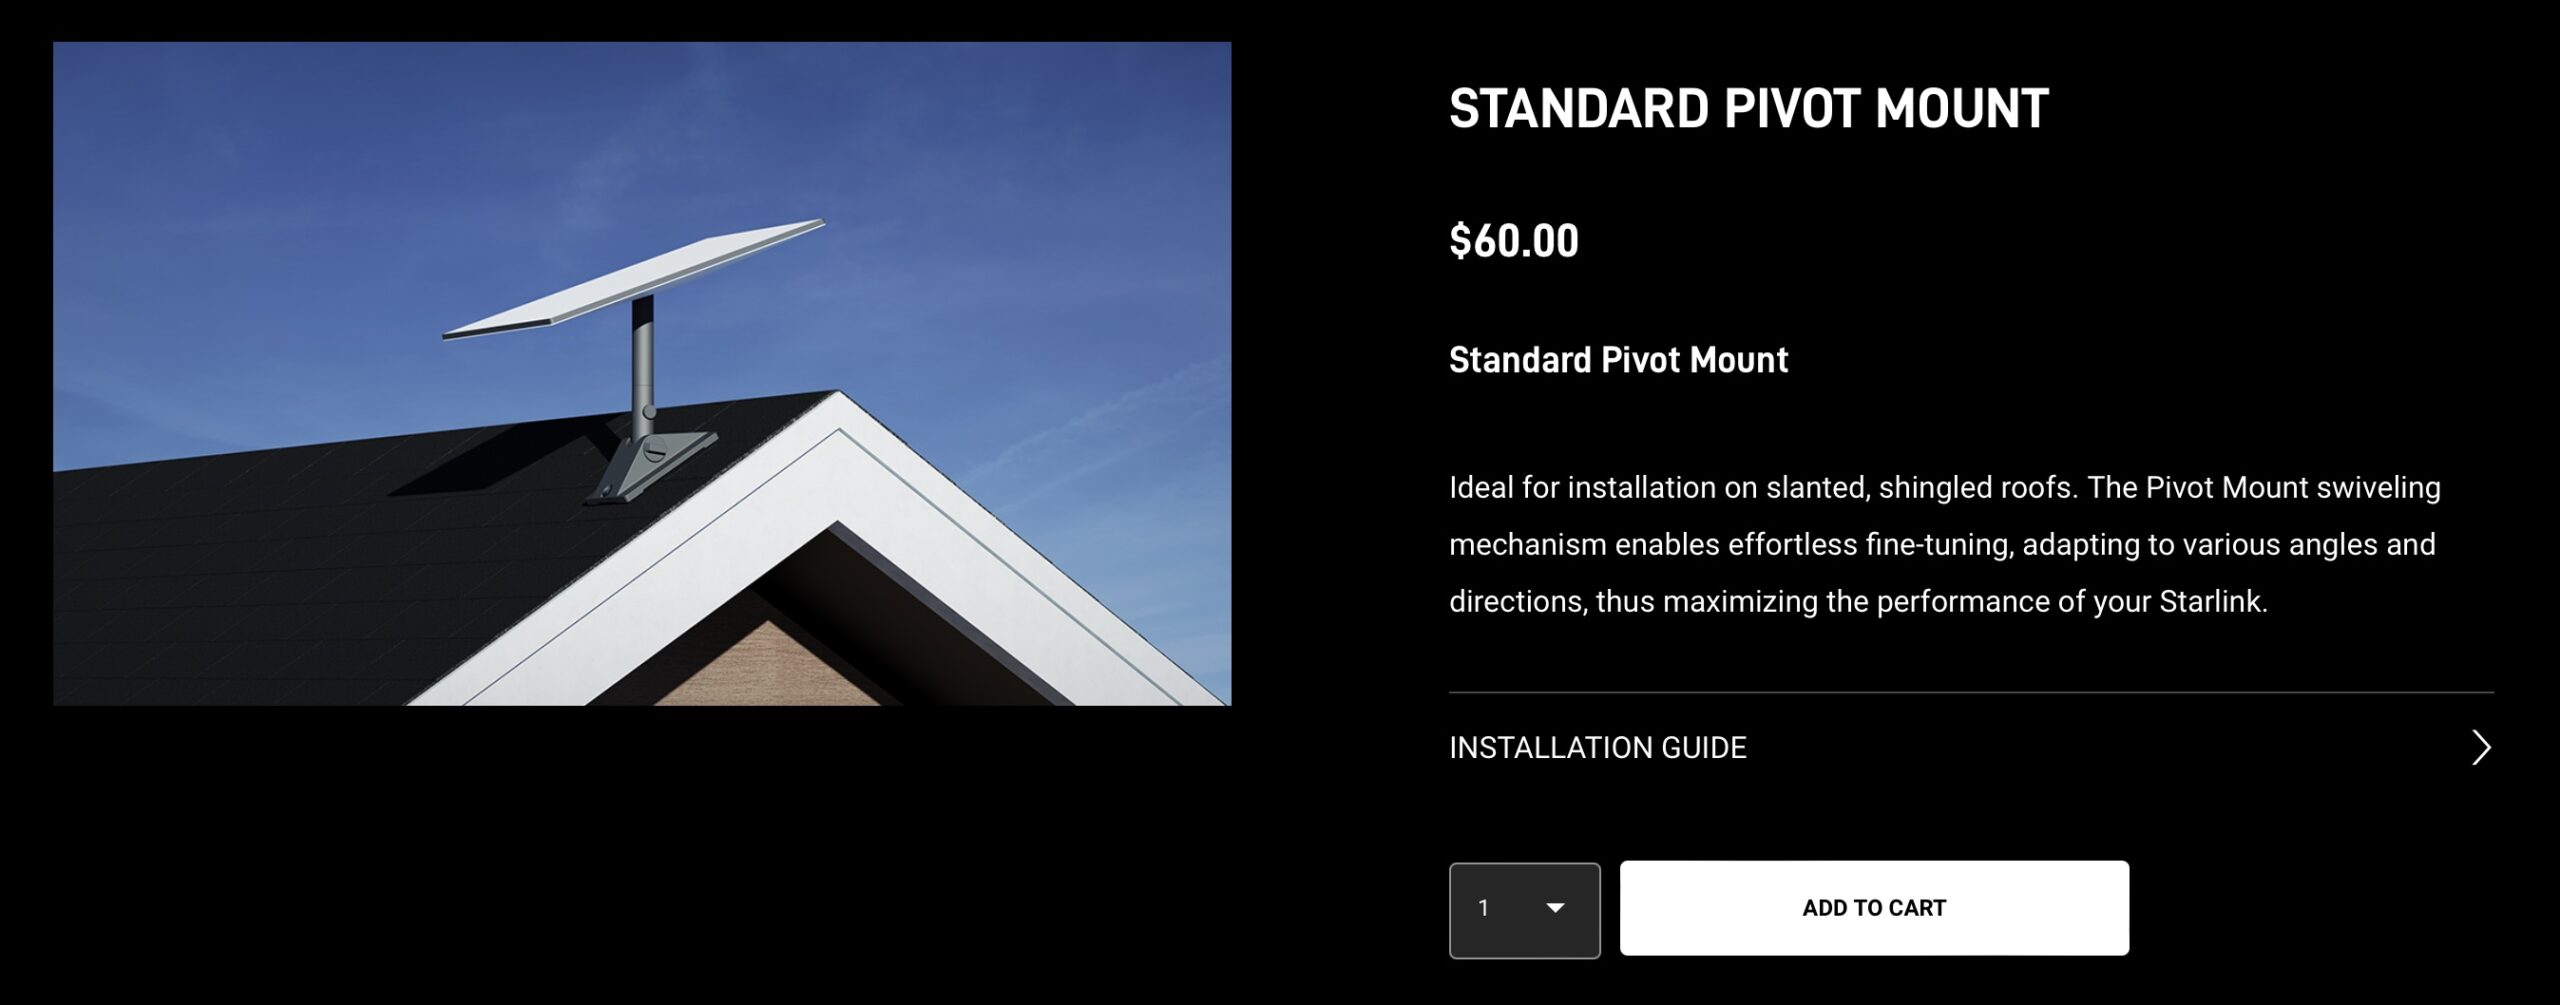 Shop page for the Standard Pivot Mount.